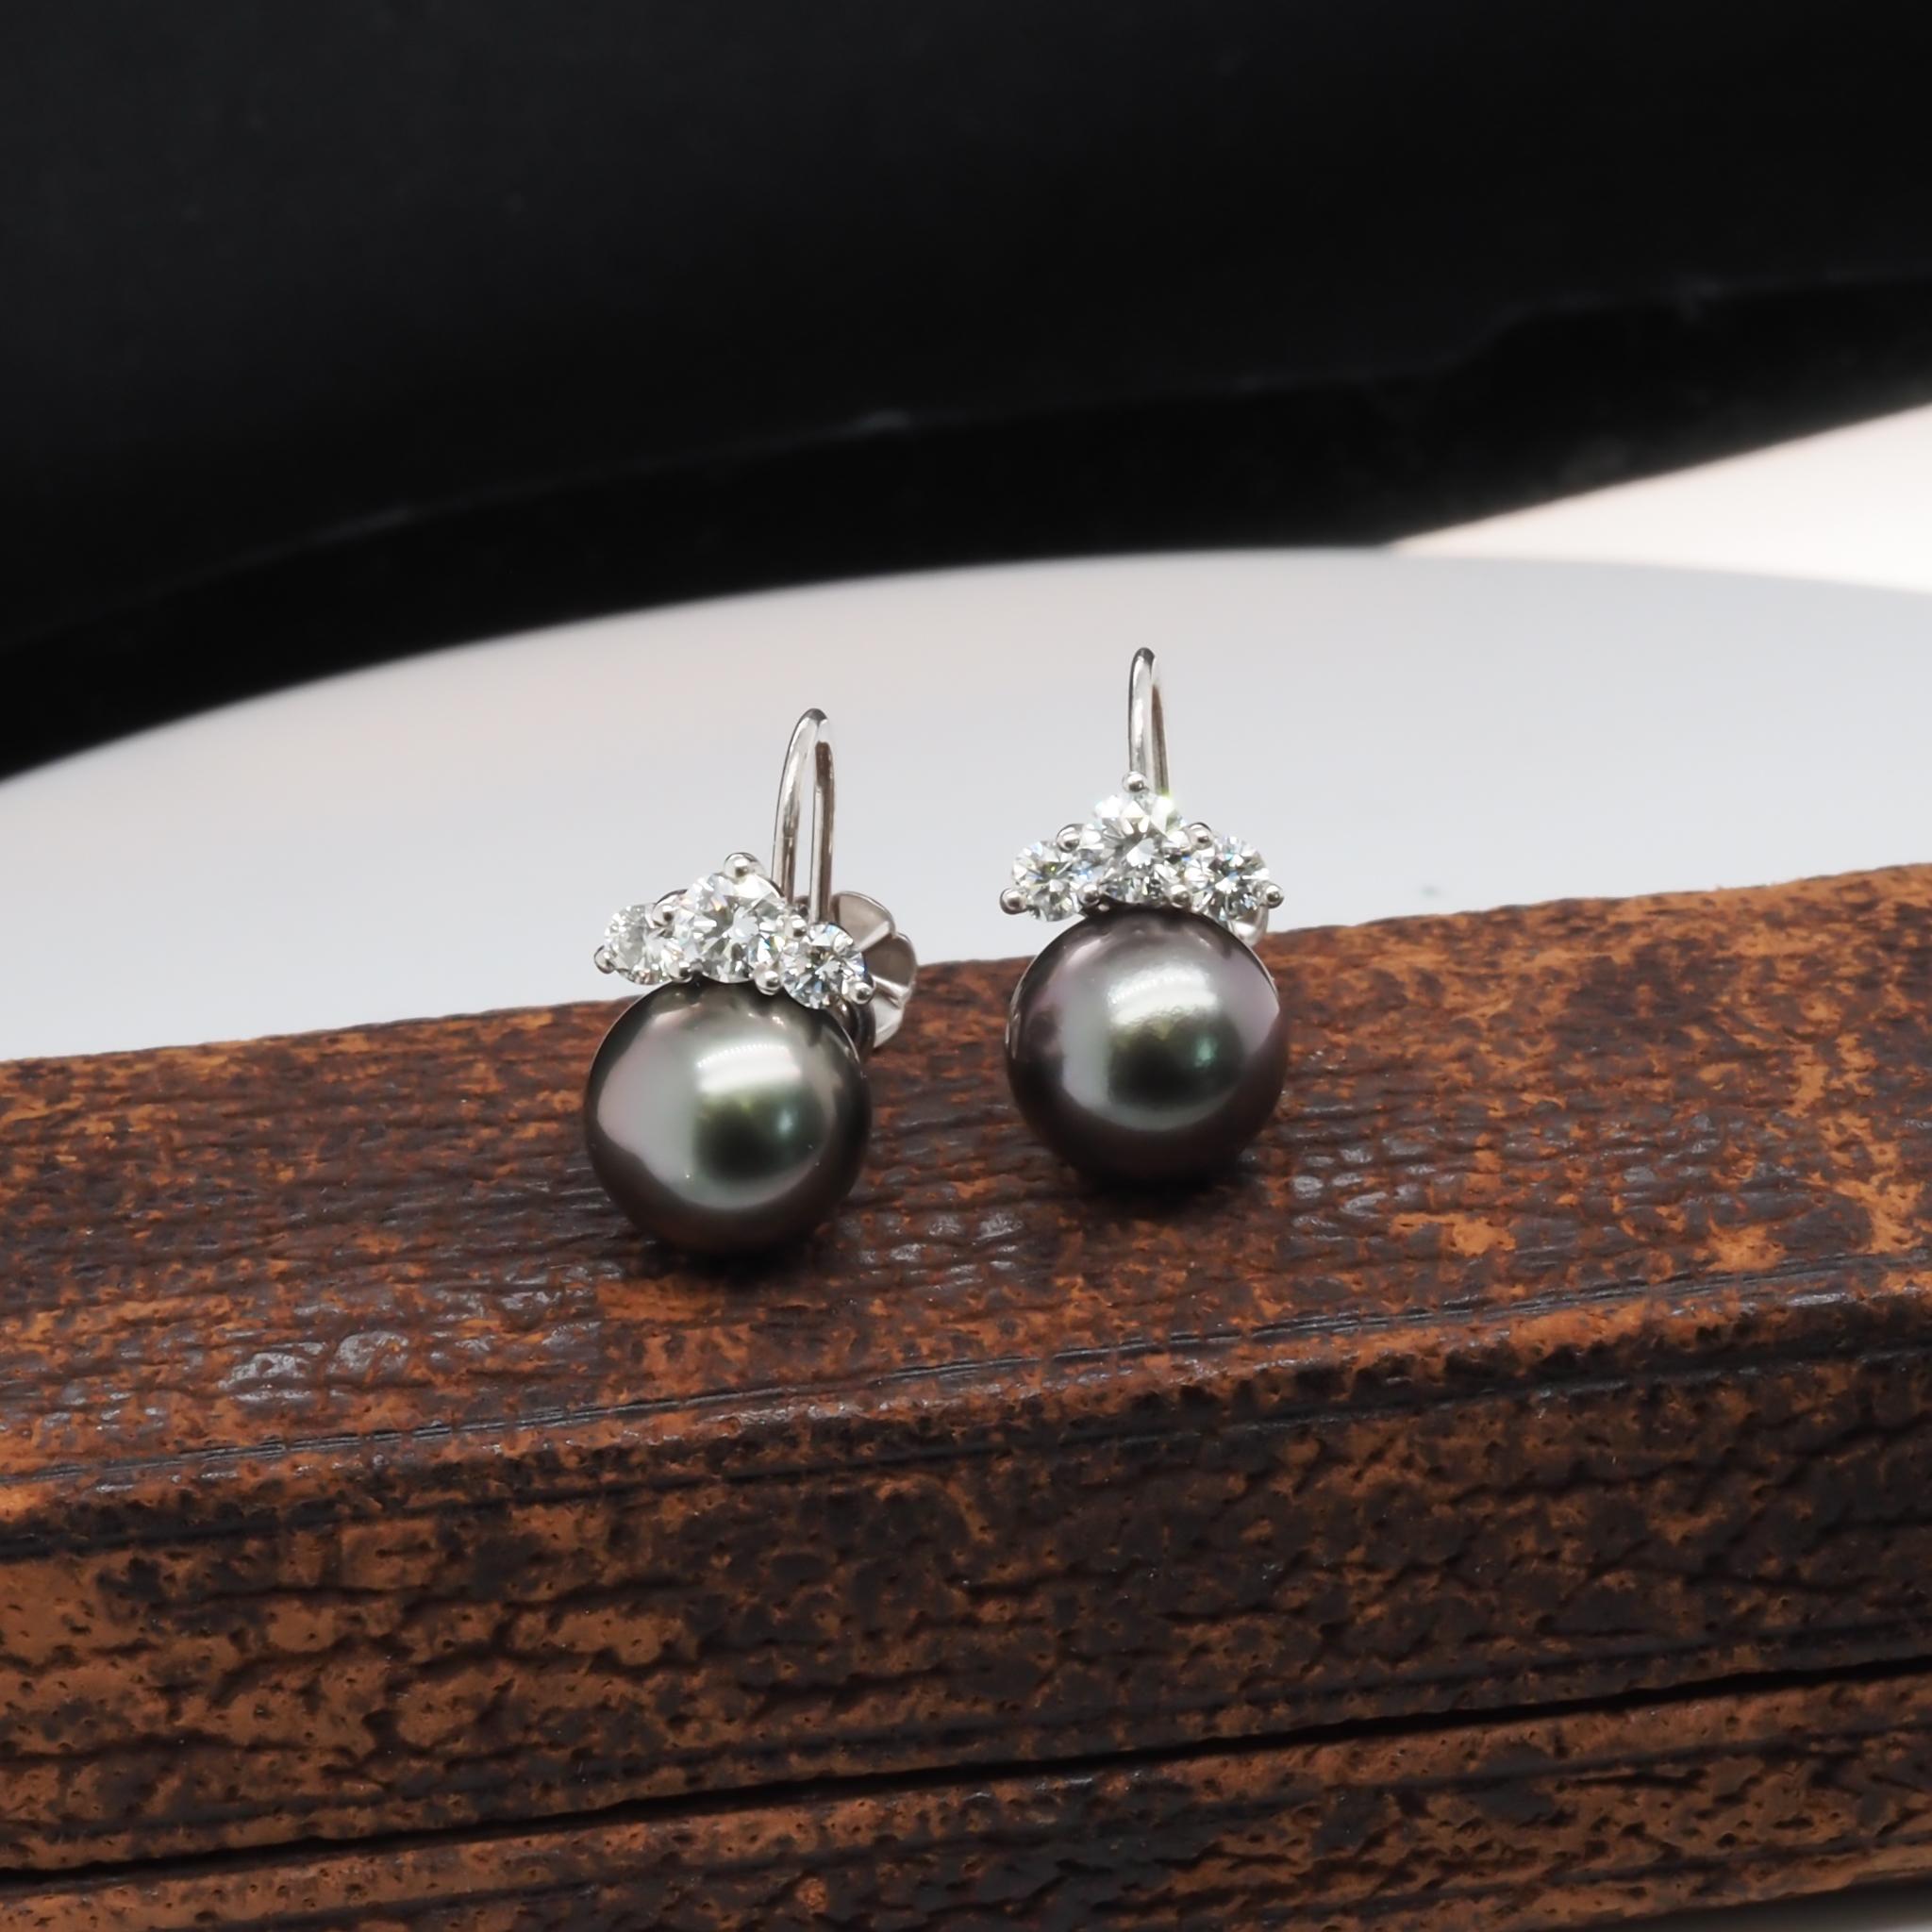 18K White Gold [Hallmarked, and Tested]
Weight: 5.3 grams
Diamond:
Weight: .70ct, total weight
Cut: Round Brilliant
Color: E-F
Clarity: VS
Pearl:
Size: 9.2mm each
Type: Tahitian Pearls

Price: 3000